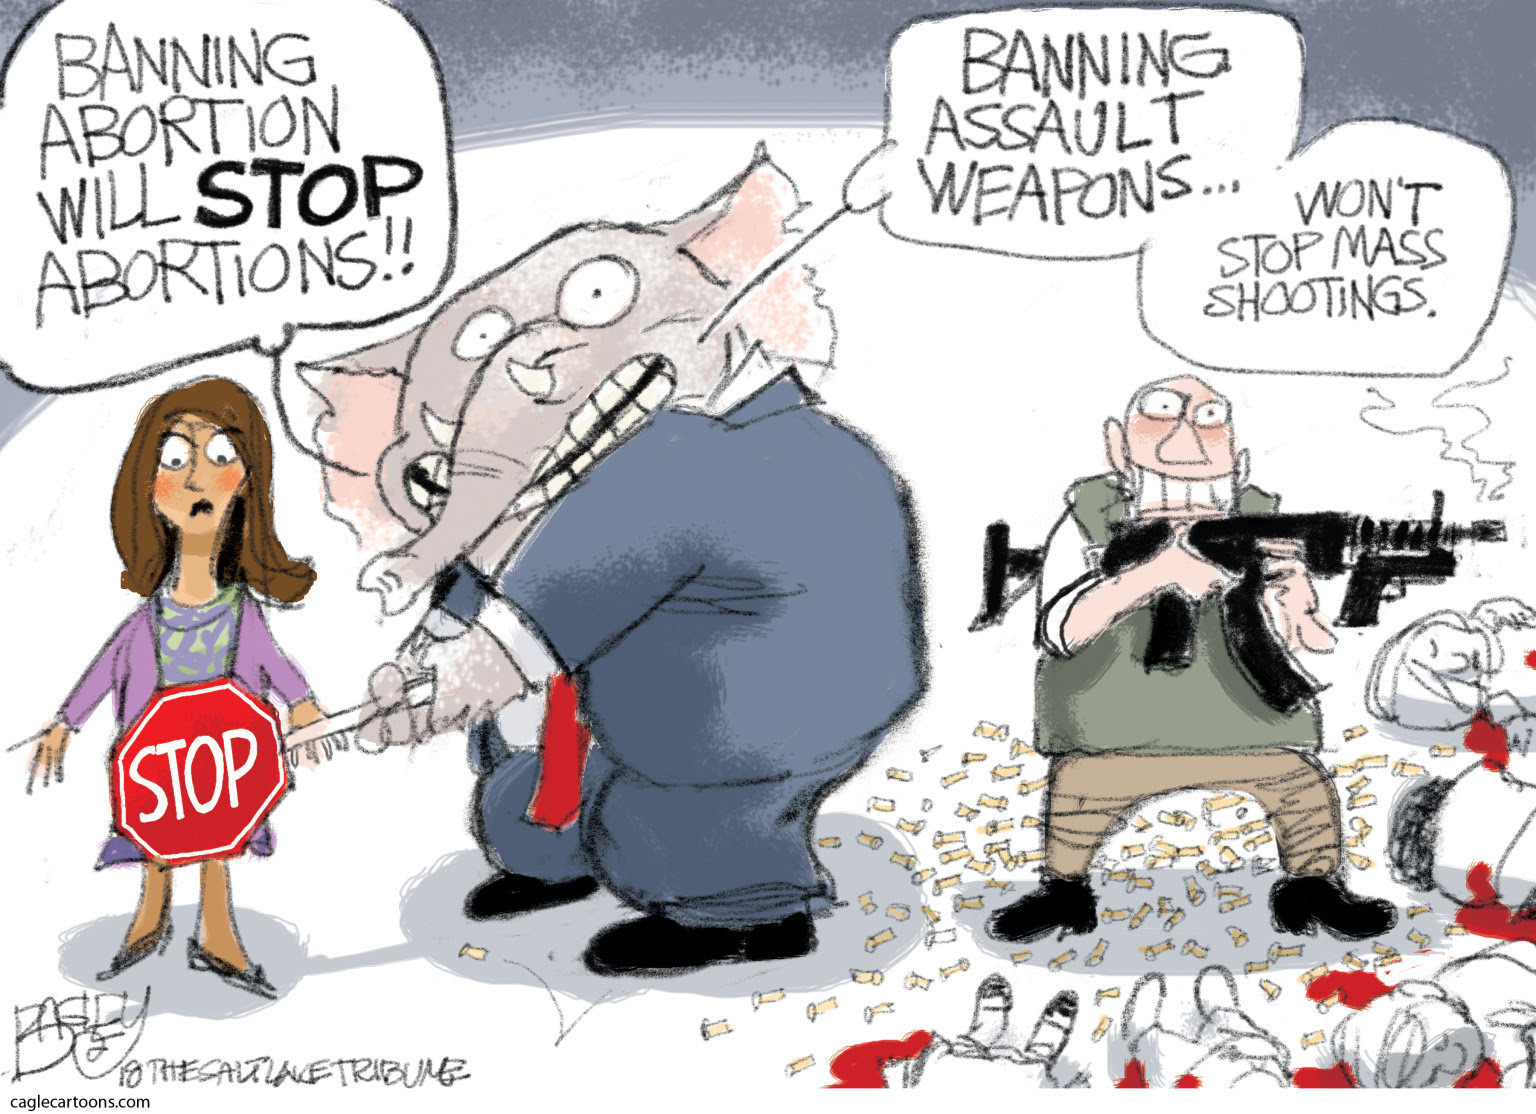 Republican hypocrisy on banning abortion rights but doing nothing on gun safety measures.